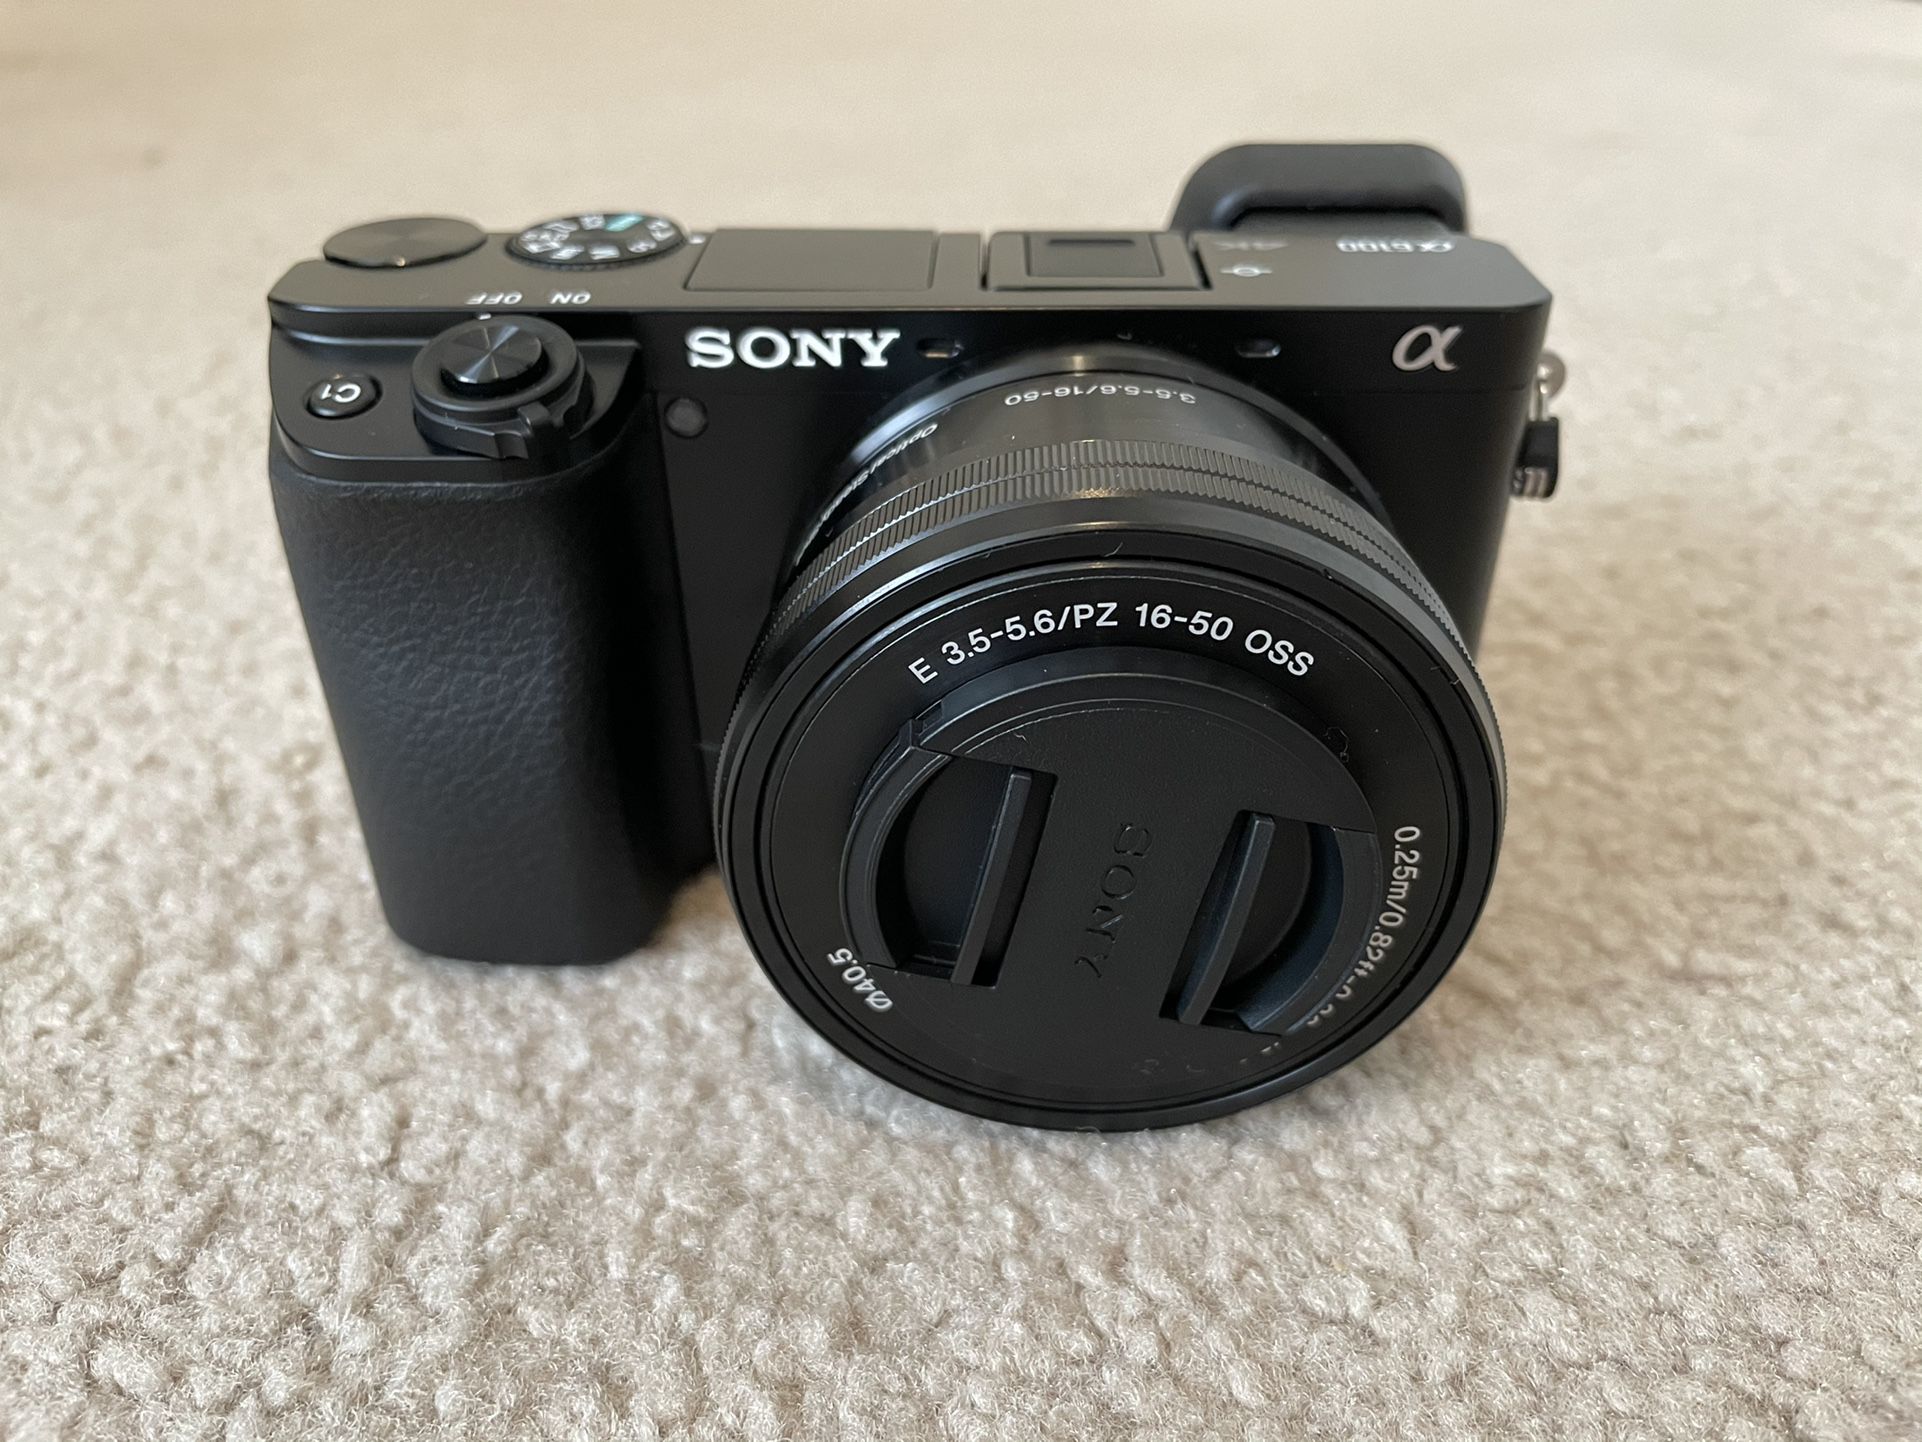 Sony a6100 with 16-50mm Kit lens